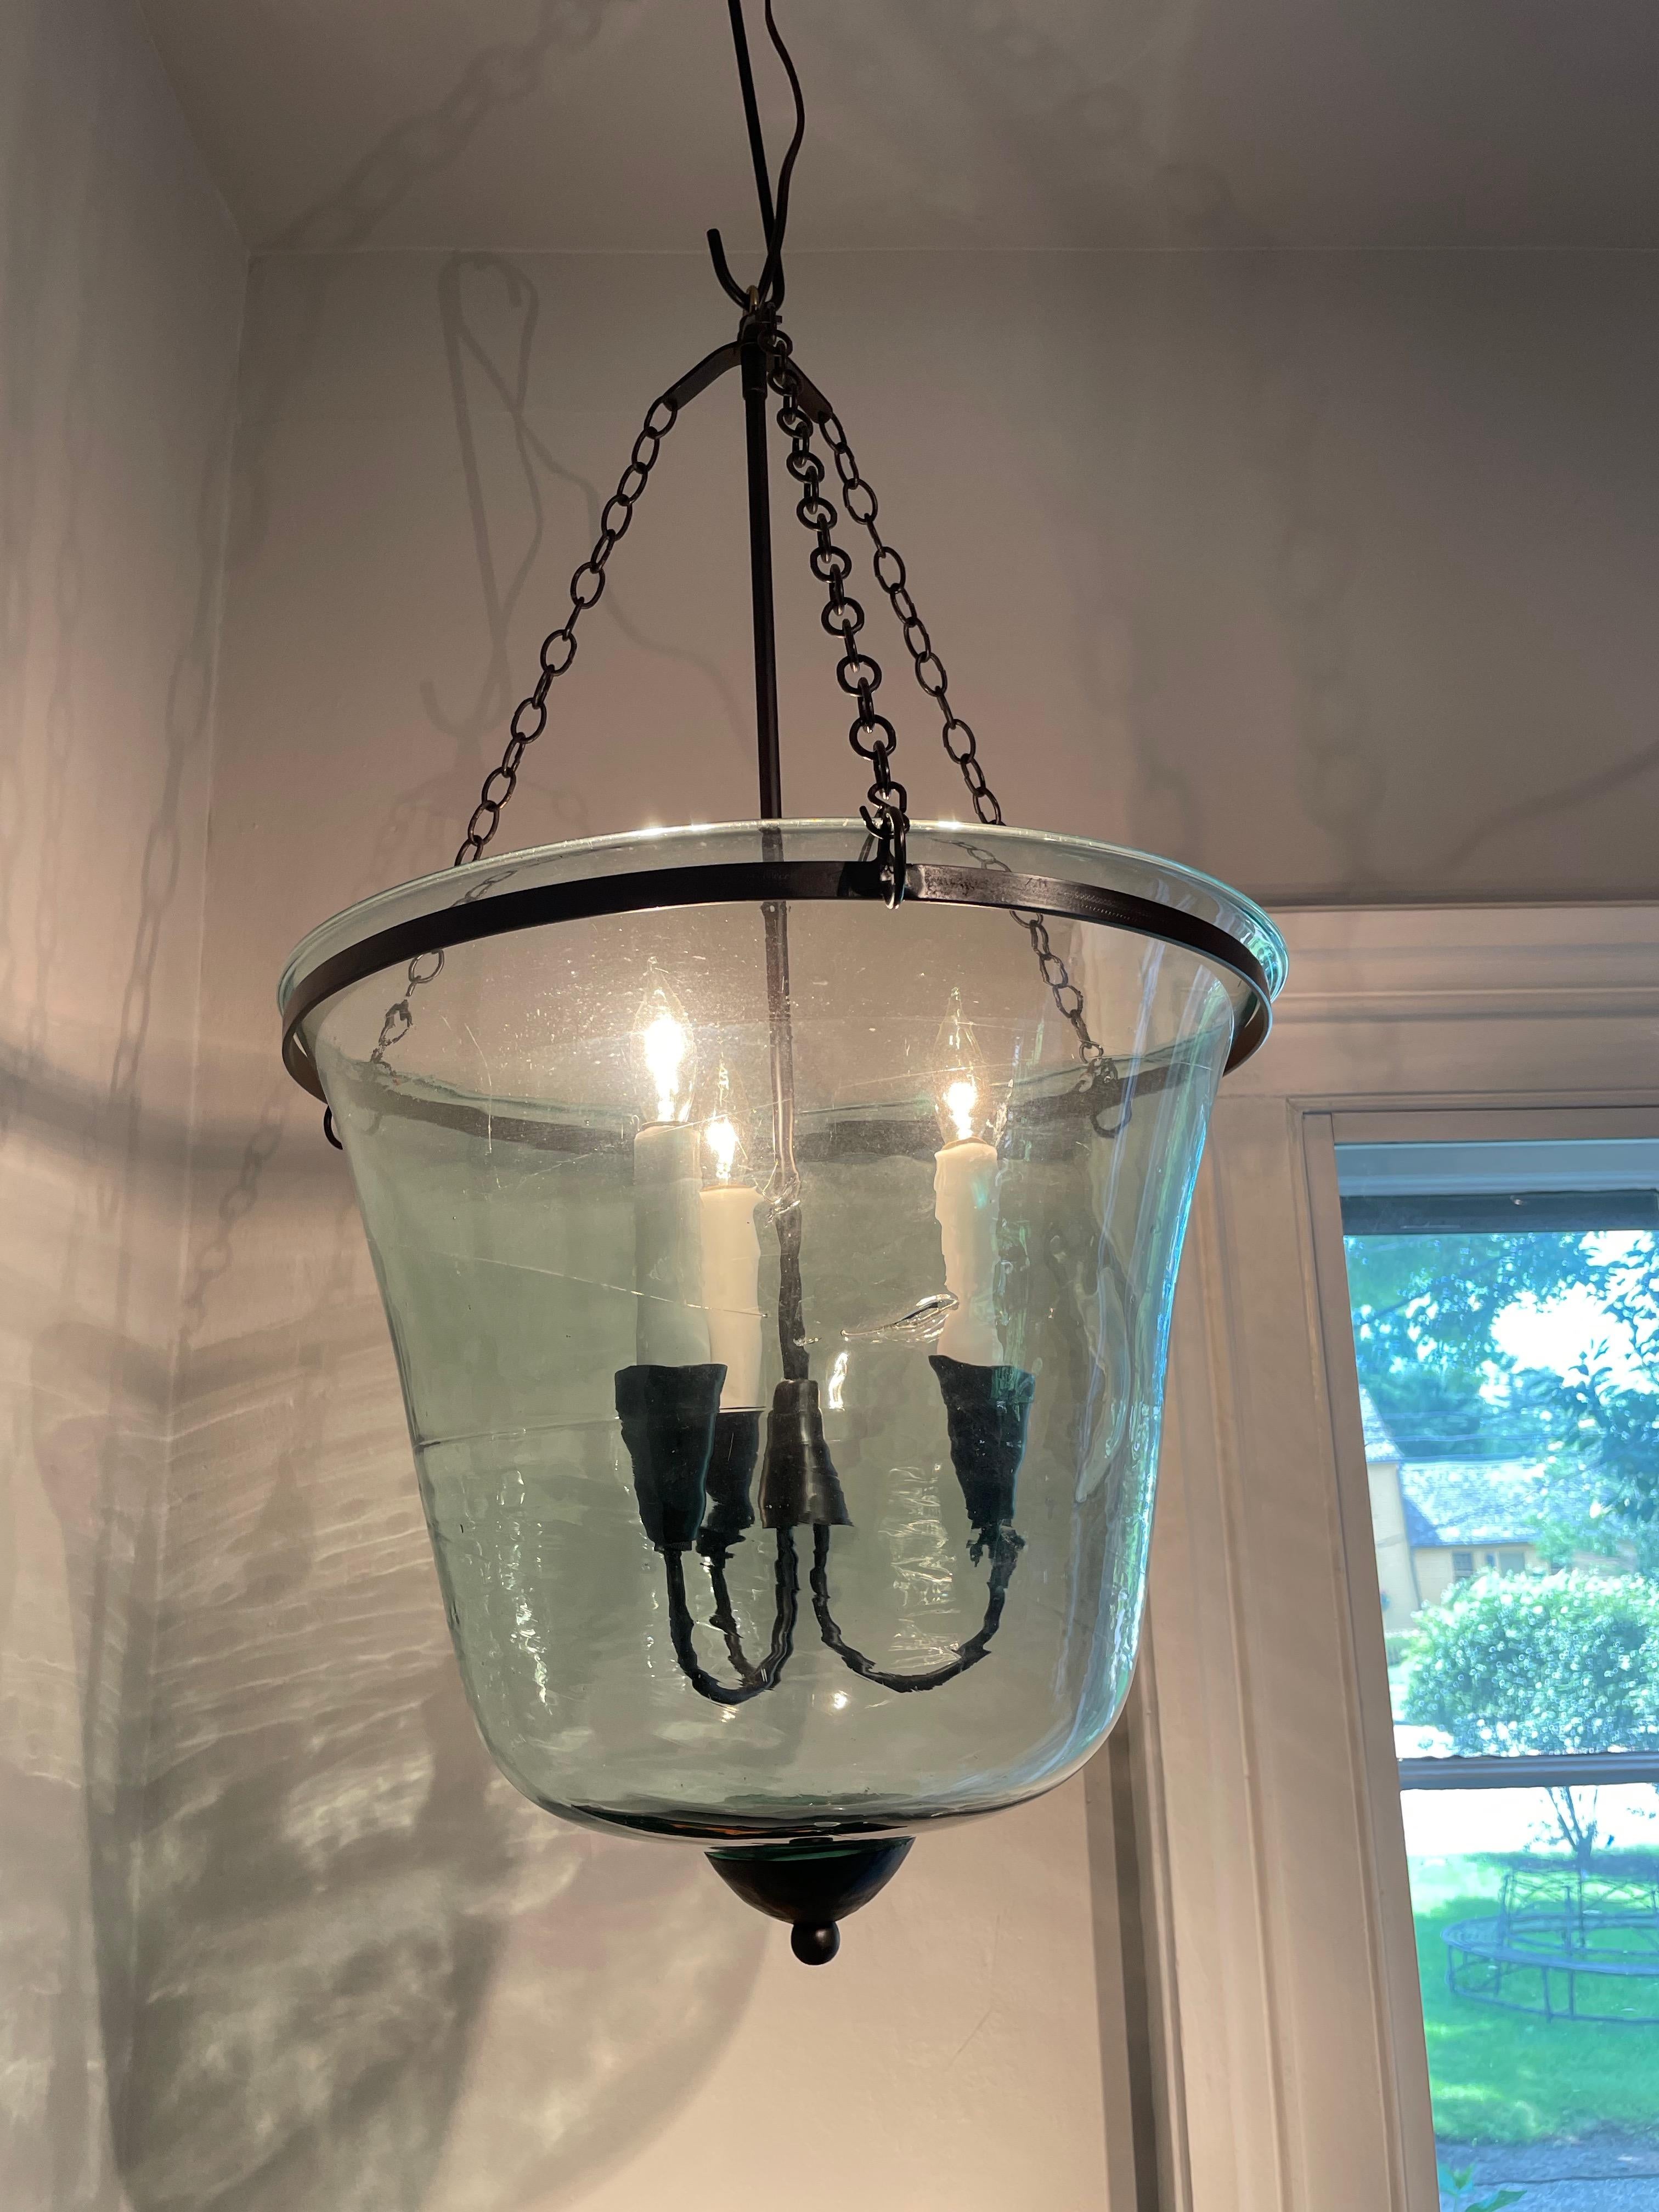 We have always had a thing for hand-blown French garden cloches that come in two configurations: bell form and melon form. This one is a bell cloche (a little taller and more narrow than a melon cloche) and it has been converted into a hanging light